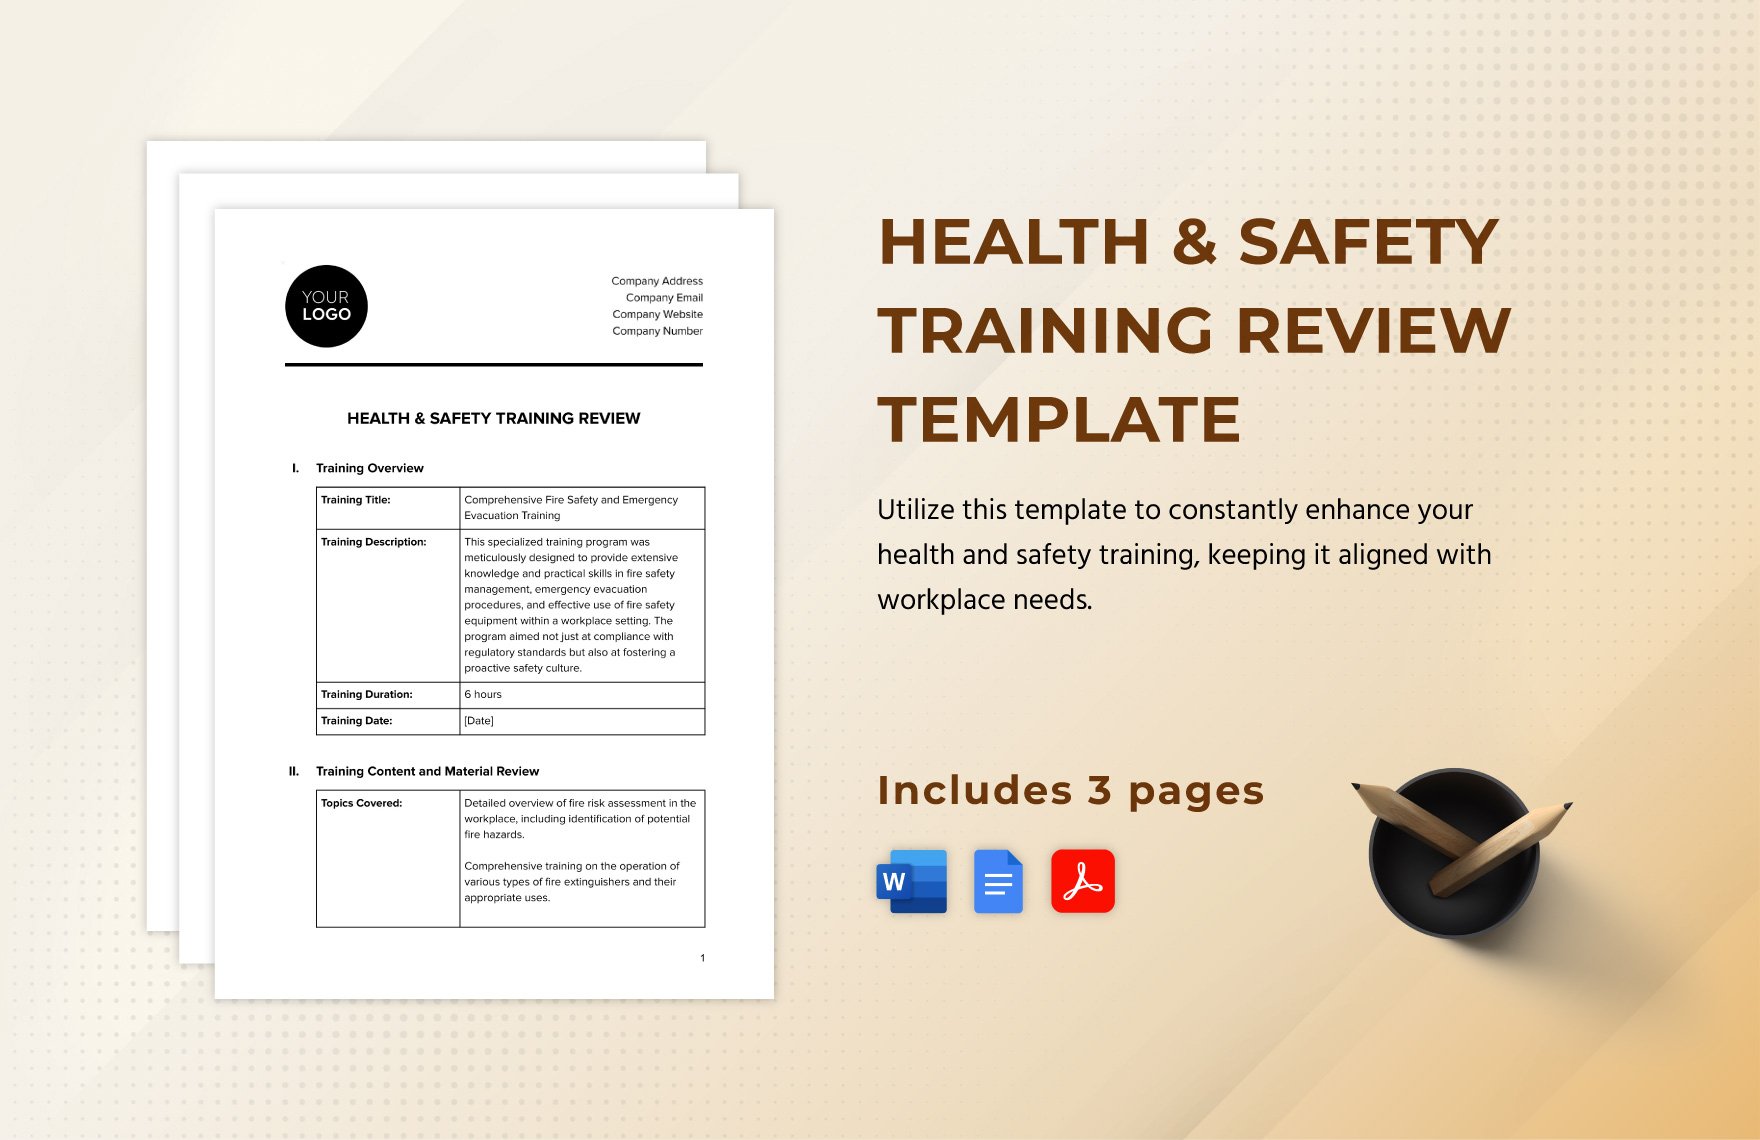 Health & Safety Training Review Template